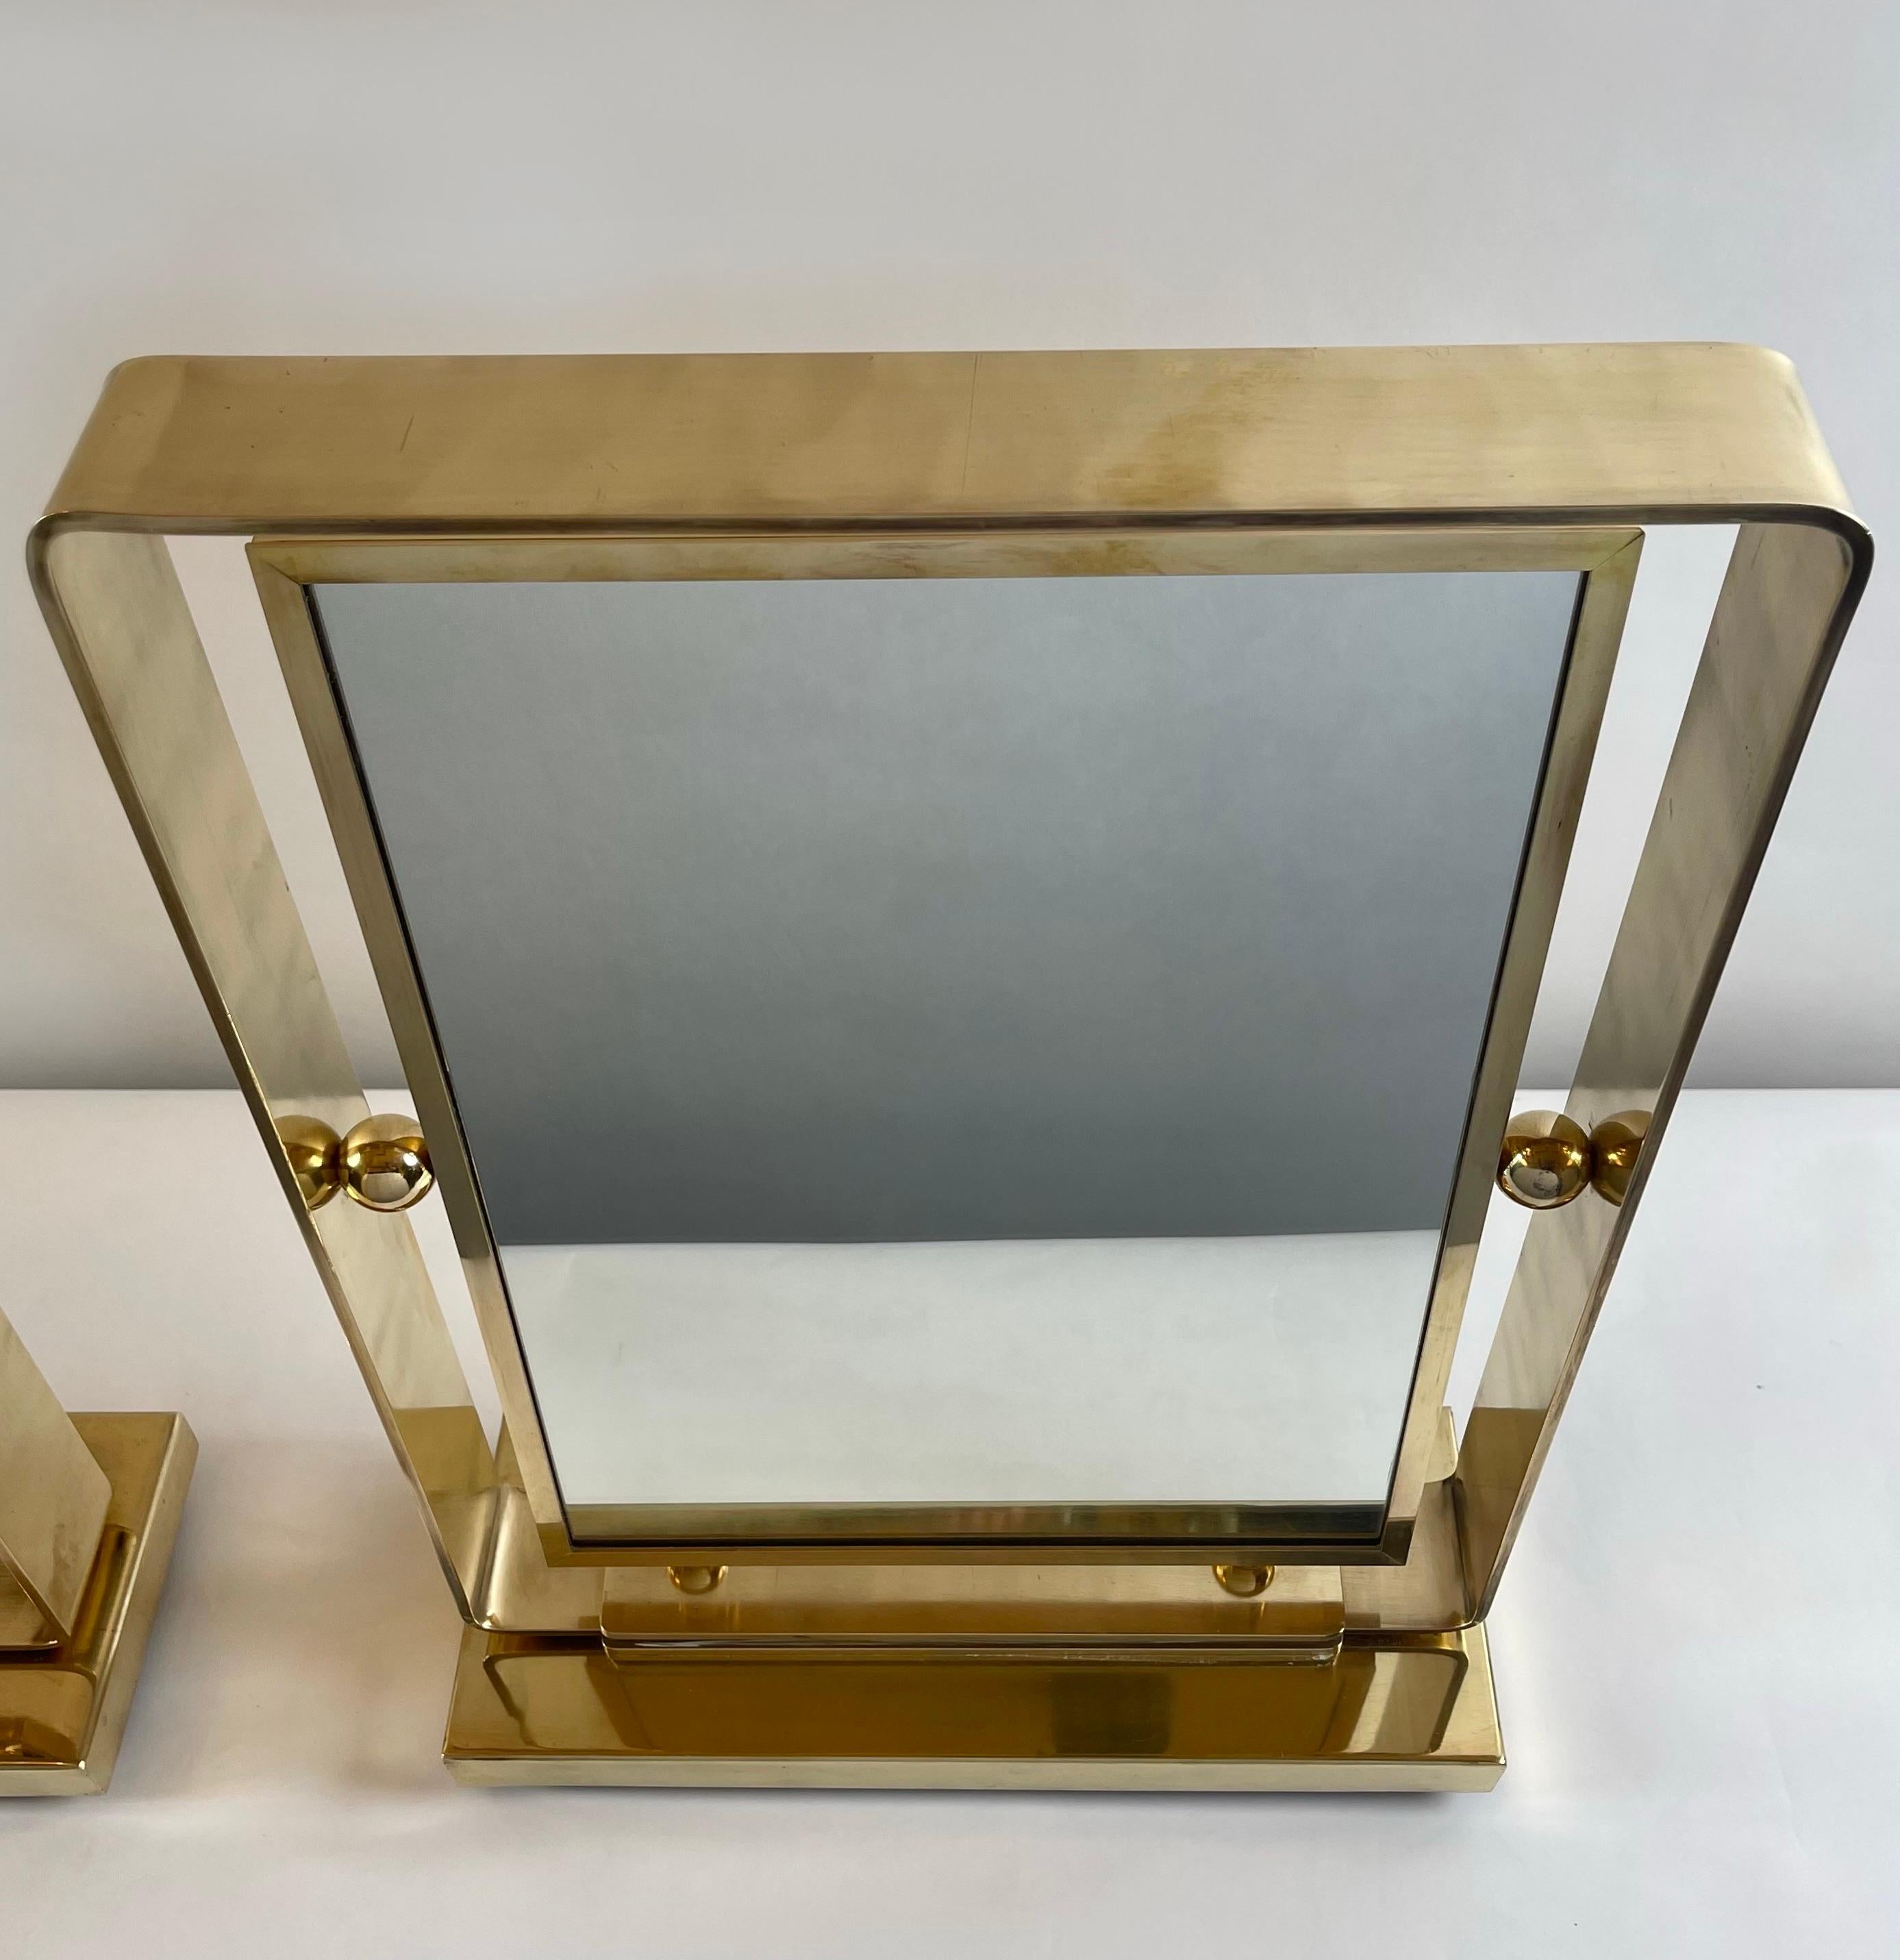 This double sided tilting table mirror is perfect to be placed on top of a console table behind a sofa or any bedroom chest of drawers.